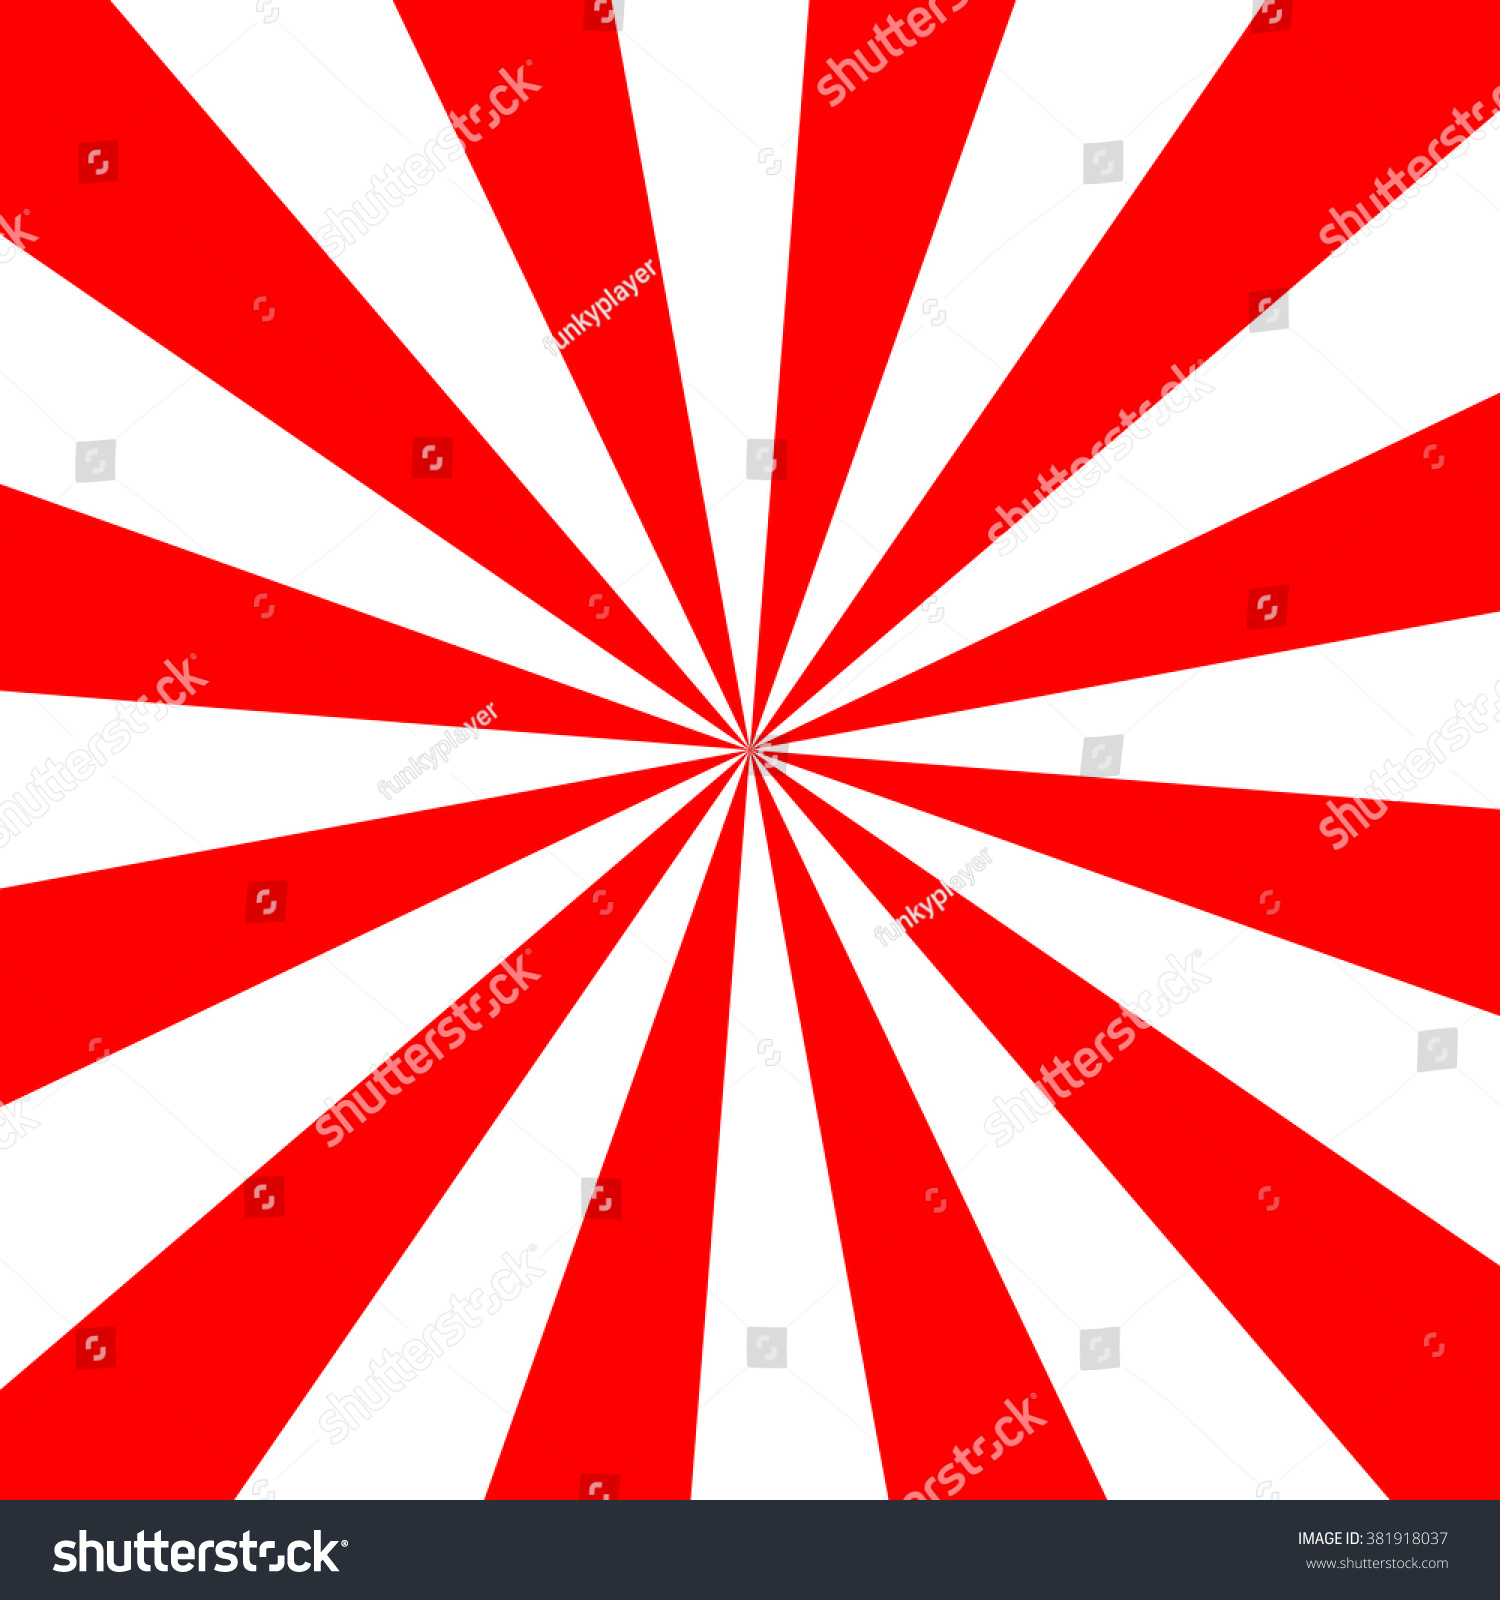 Red White Sunbeam Background Red Striped Stock Vector 381918037